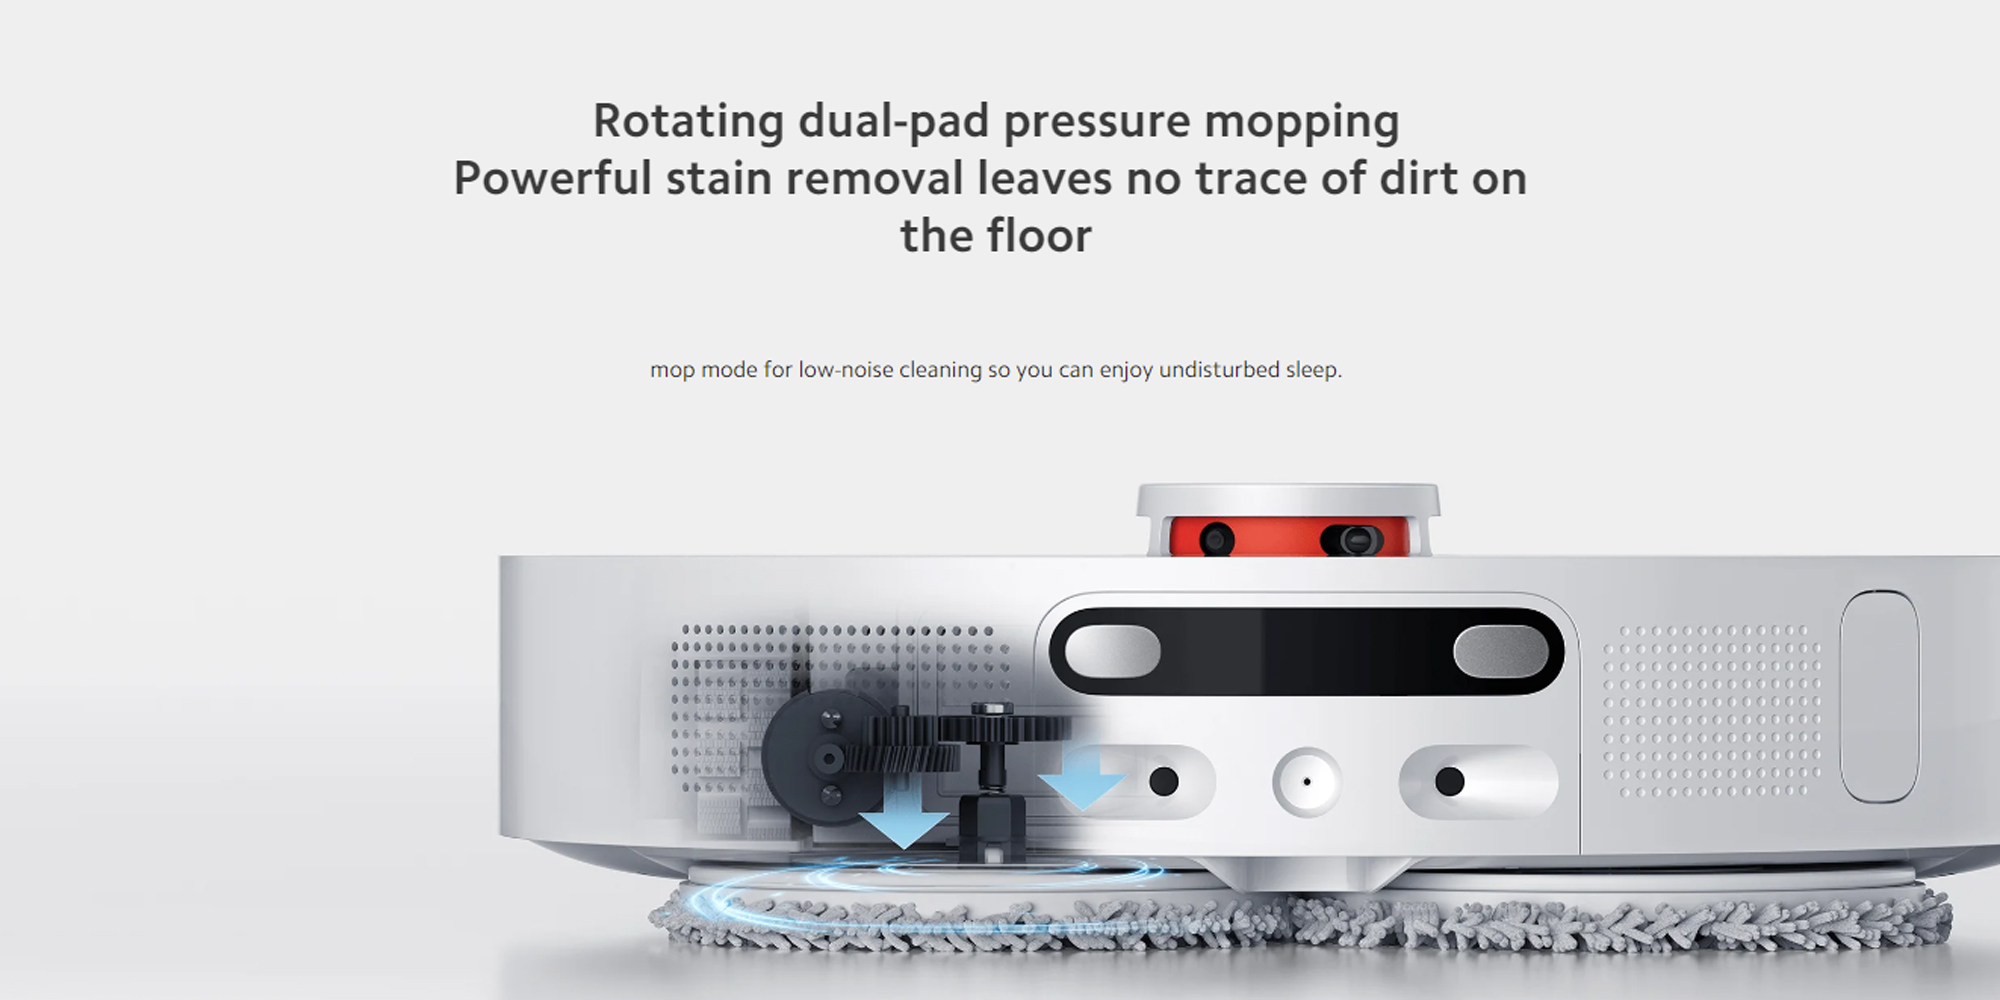 Xiaomi Robot Vacuum X10+ Robot Vacuum X10+ Extreme cleaning,  extraordinarily automated